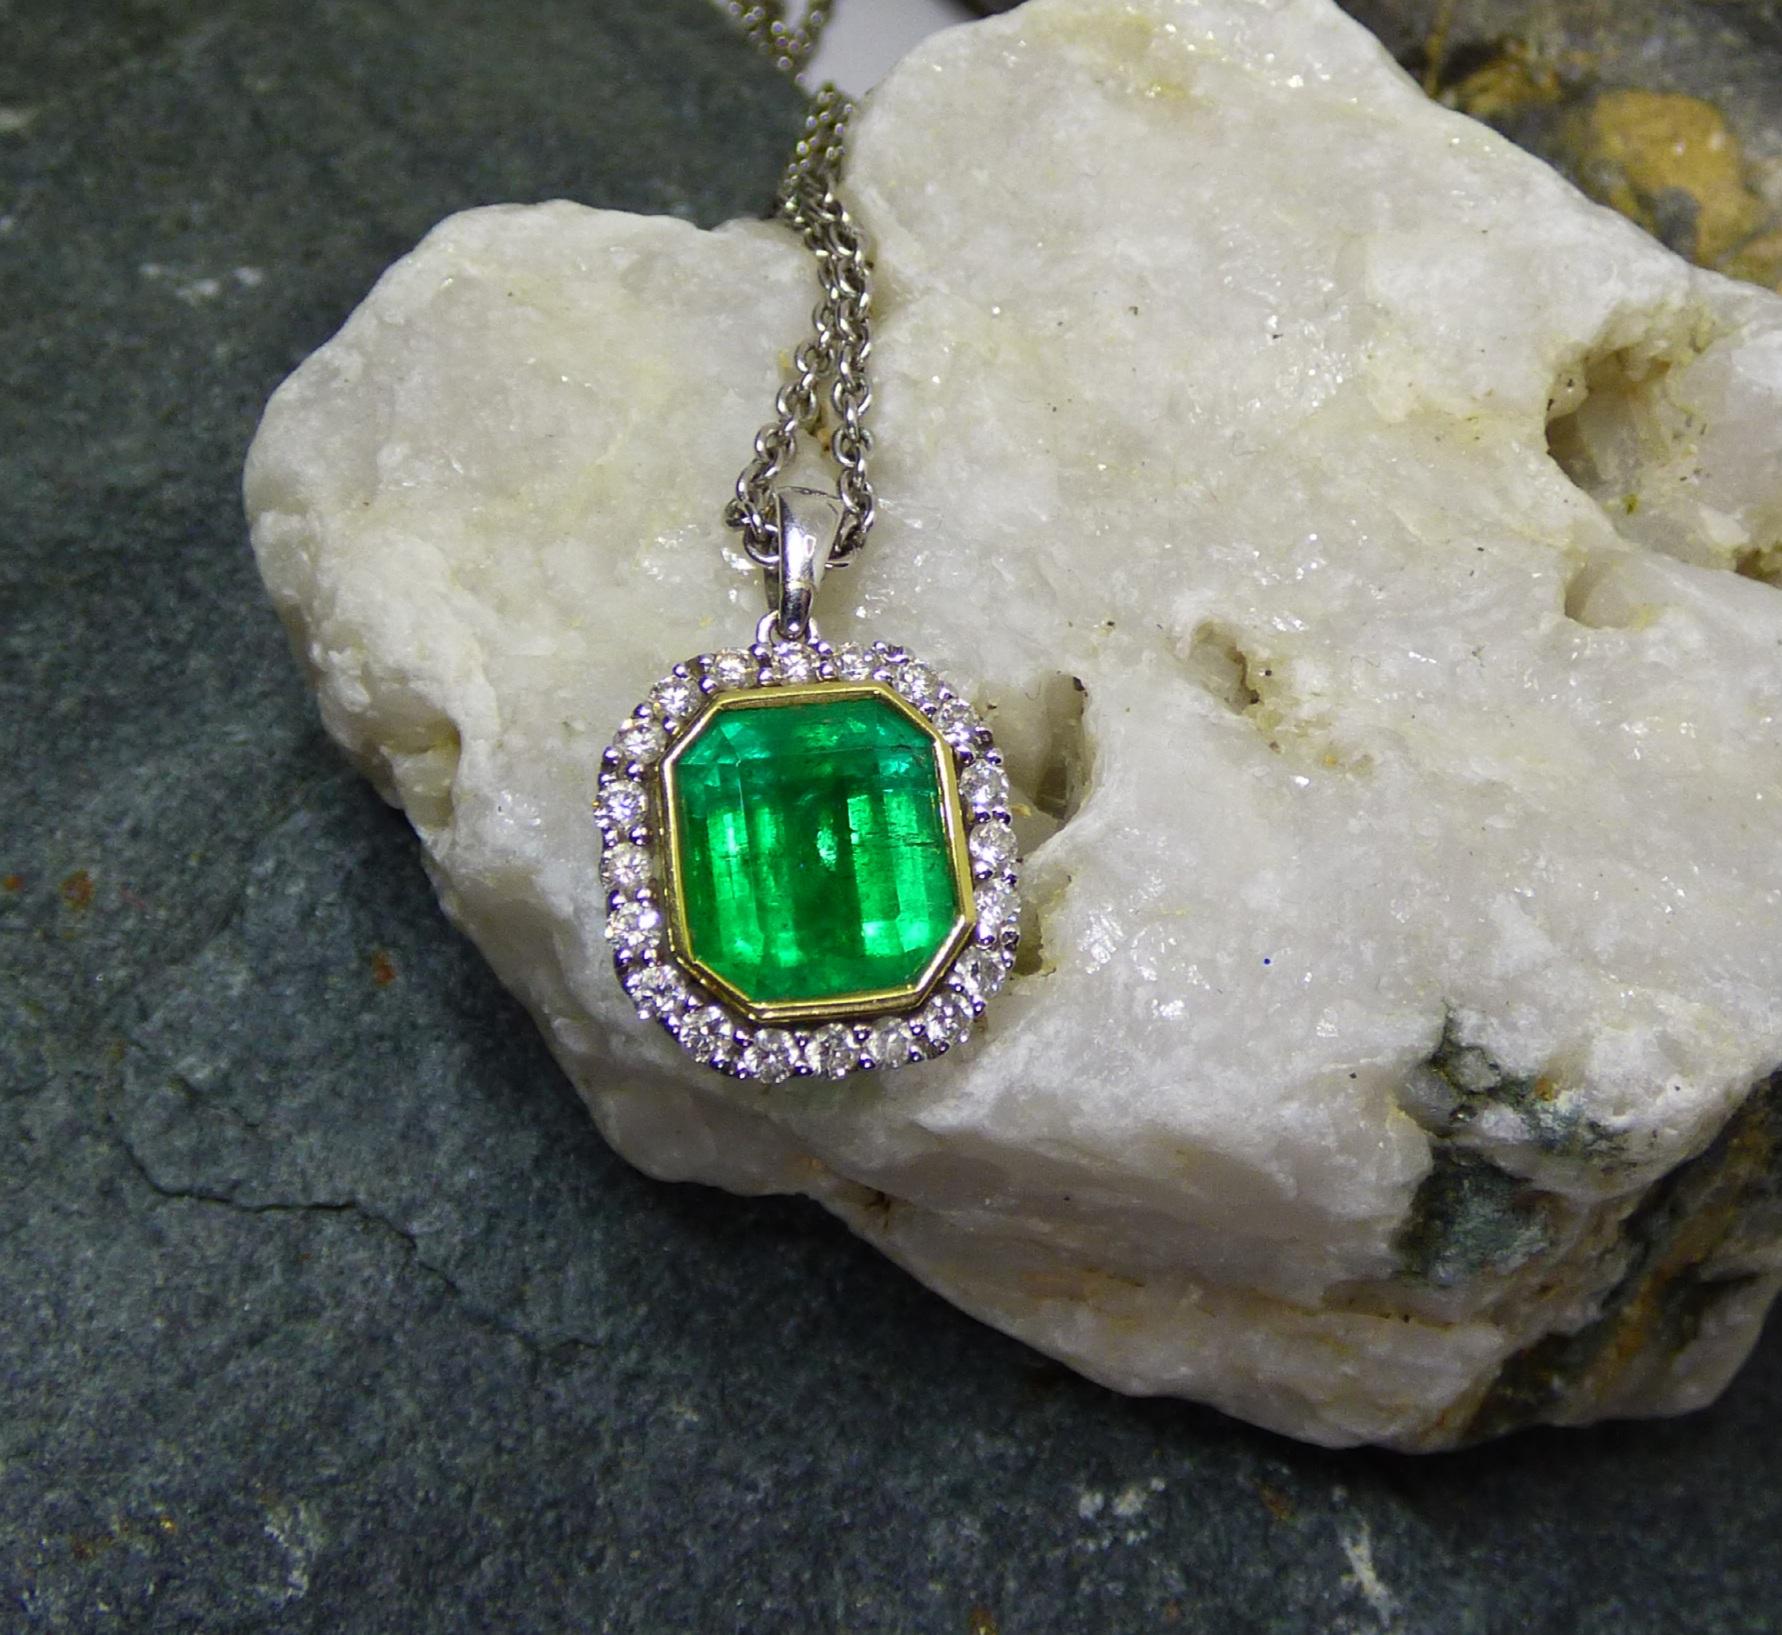 A colourful 10X9mm Step cut Emerald (4.28ct) sets off this pendant. The Emerald is surrounded by 20 Diamonds (.64ct). The total size of the pendant is 15X15mm and handmade  18K white gold with the Emerald bezel set in 18K yellow gold. It is